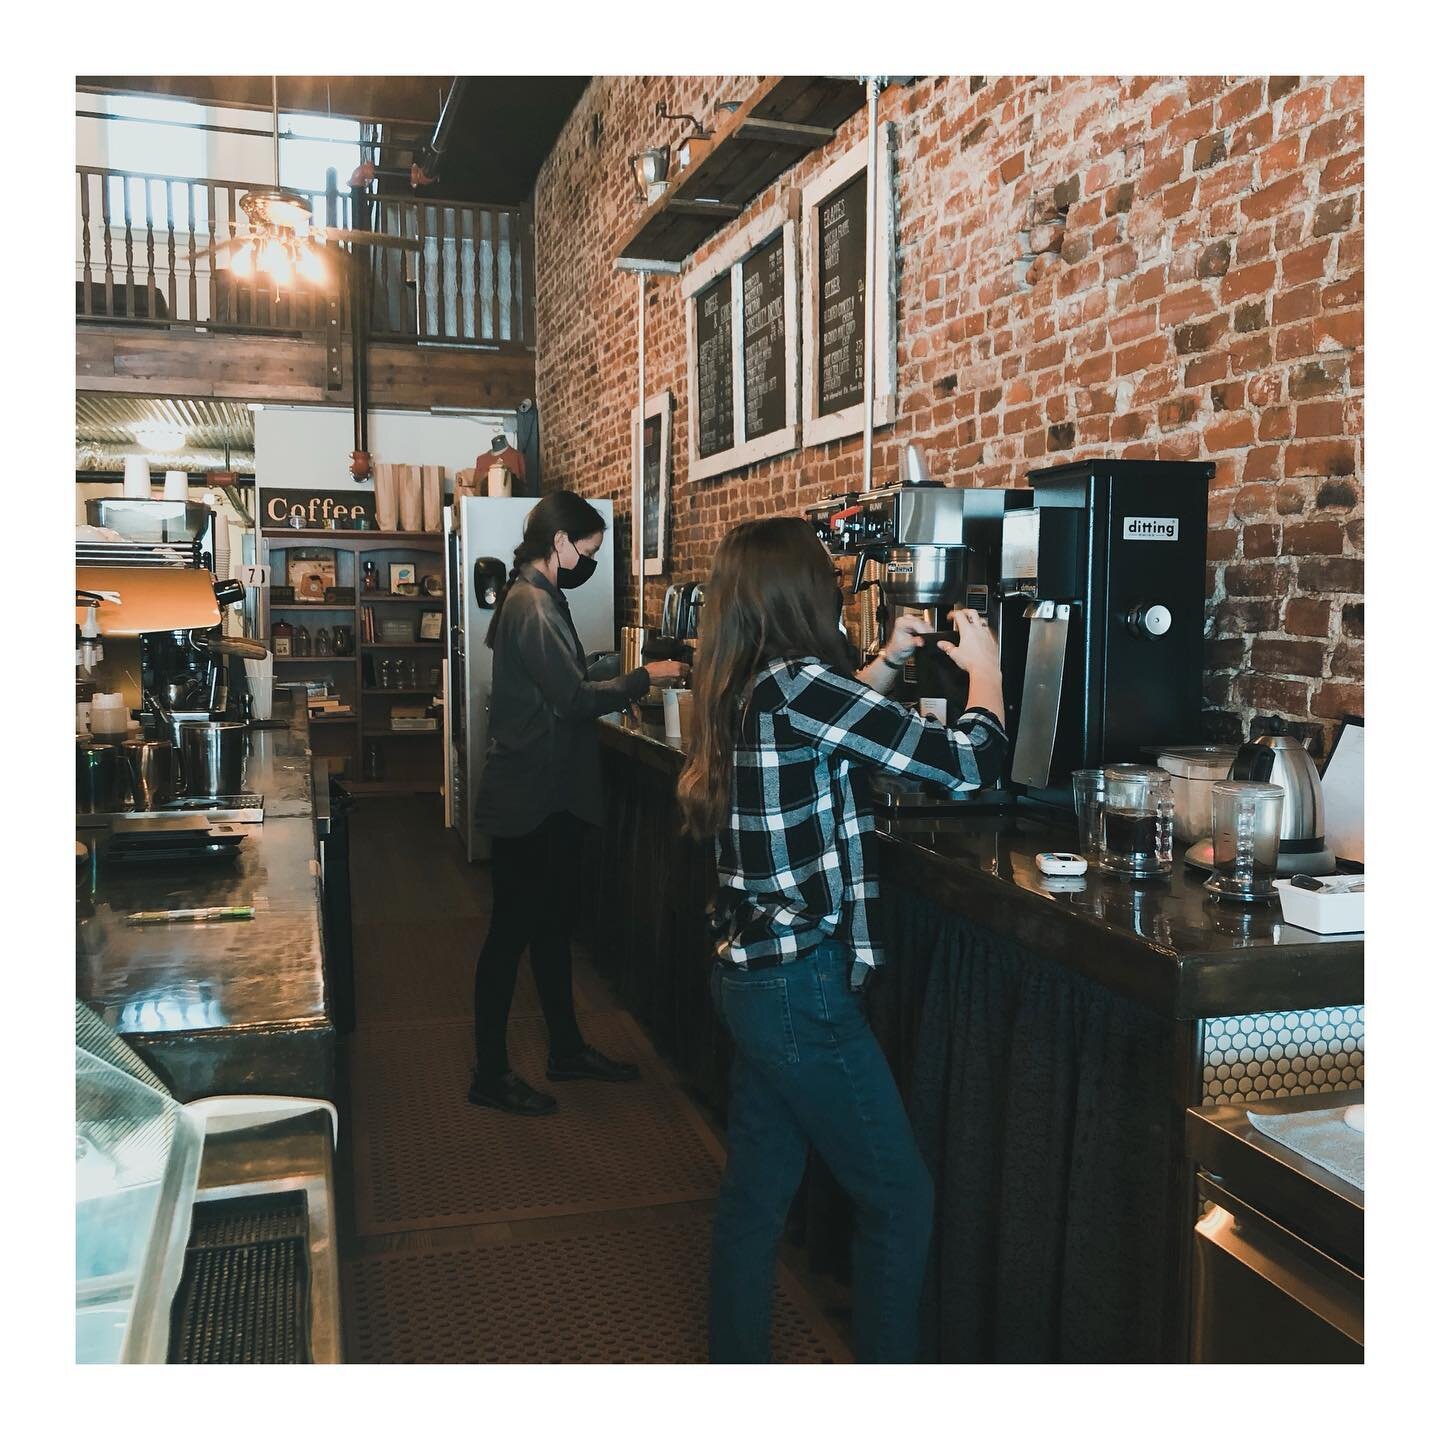 COFFEE!!! It&rsquo;s essential, right? Luckily, for all our guests, we are *right* next door to the downtown and amazing coffee shop @thecoffeecollective_tn ! They are great neighbors and we encourage those visiting to stop in and grab some delicious